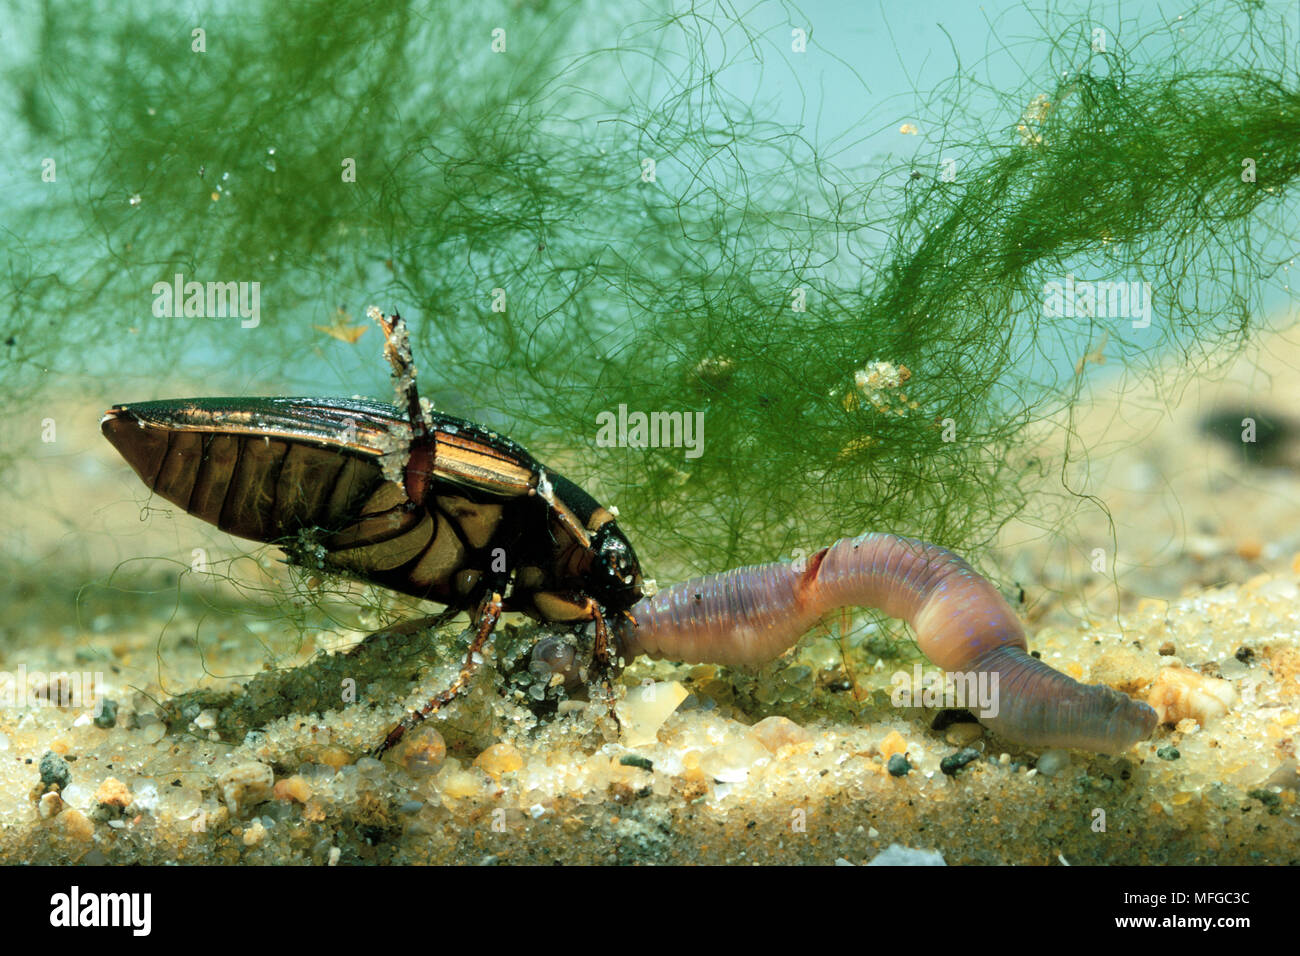 GREAT DIVING BEETLE  Dytiscus marginalis feeding on worm. aka MARGINED>  WATER BEETLE COLEOPTERA Stock Photo